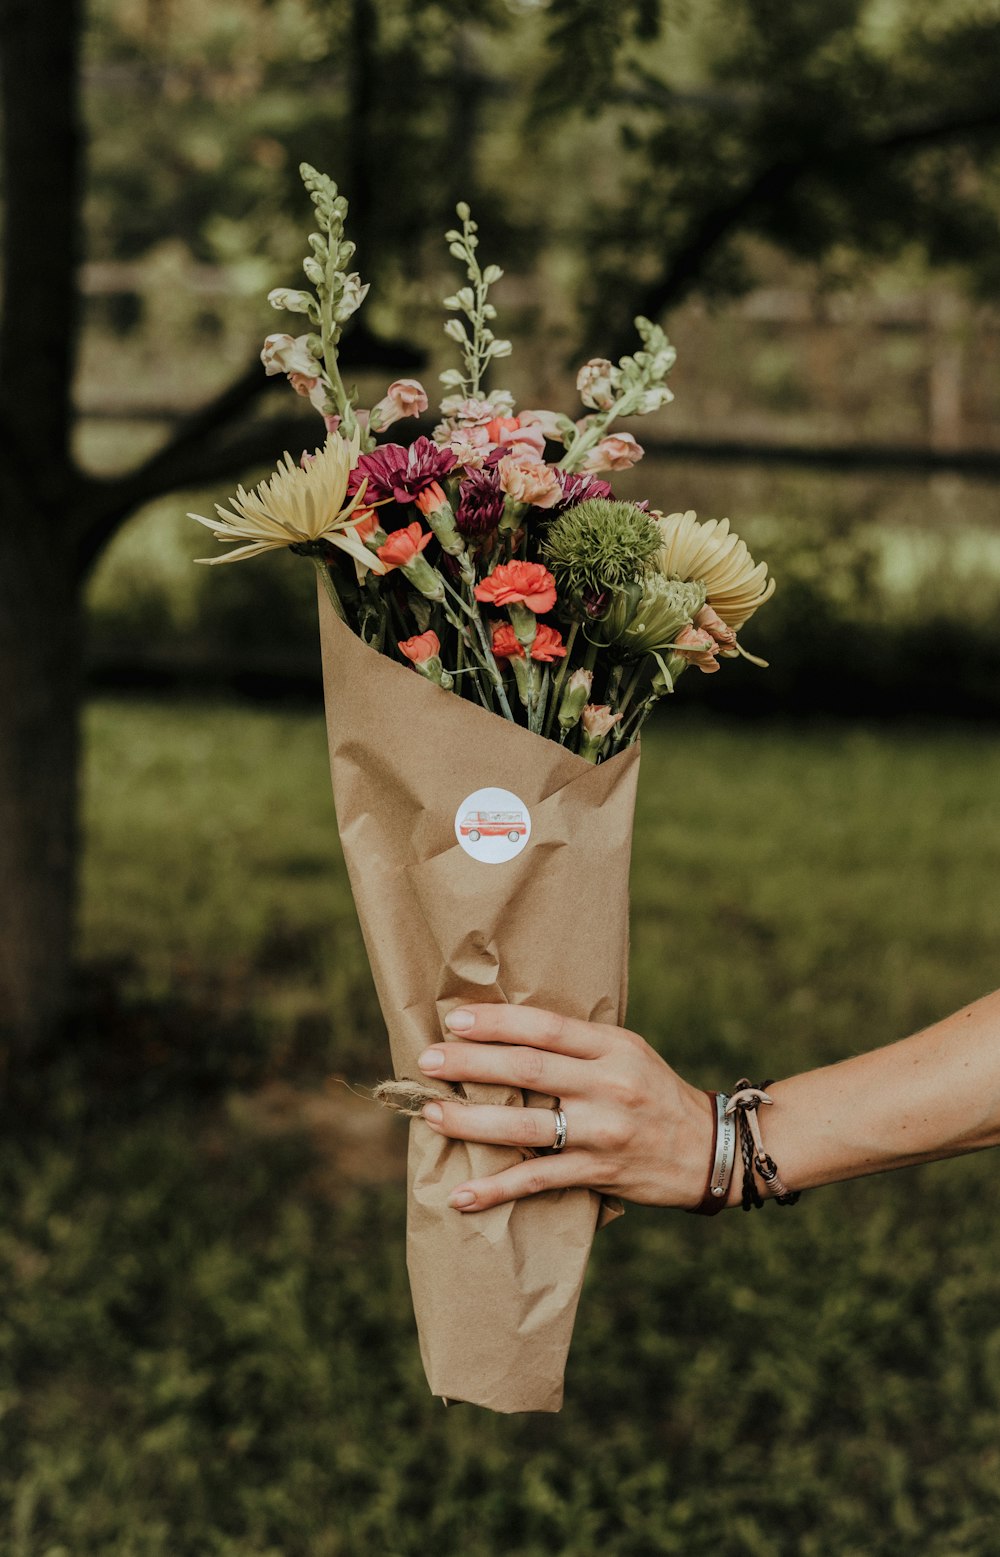 Flower bouquet wrapped in brown paper photo – Free Plant Image on